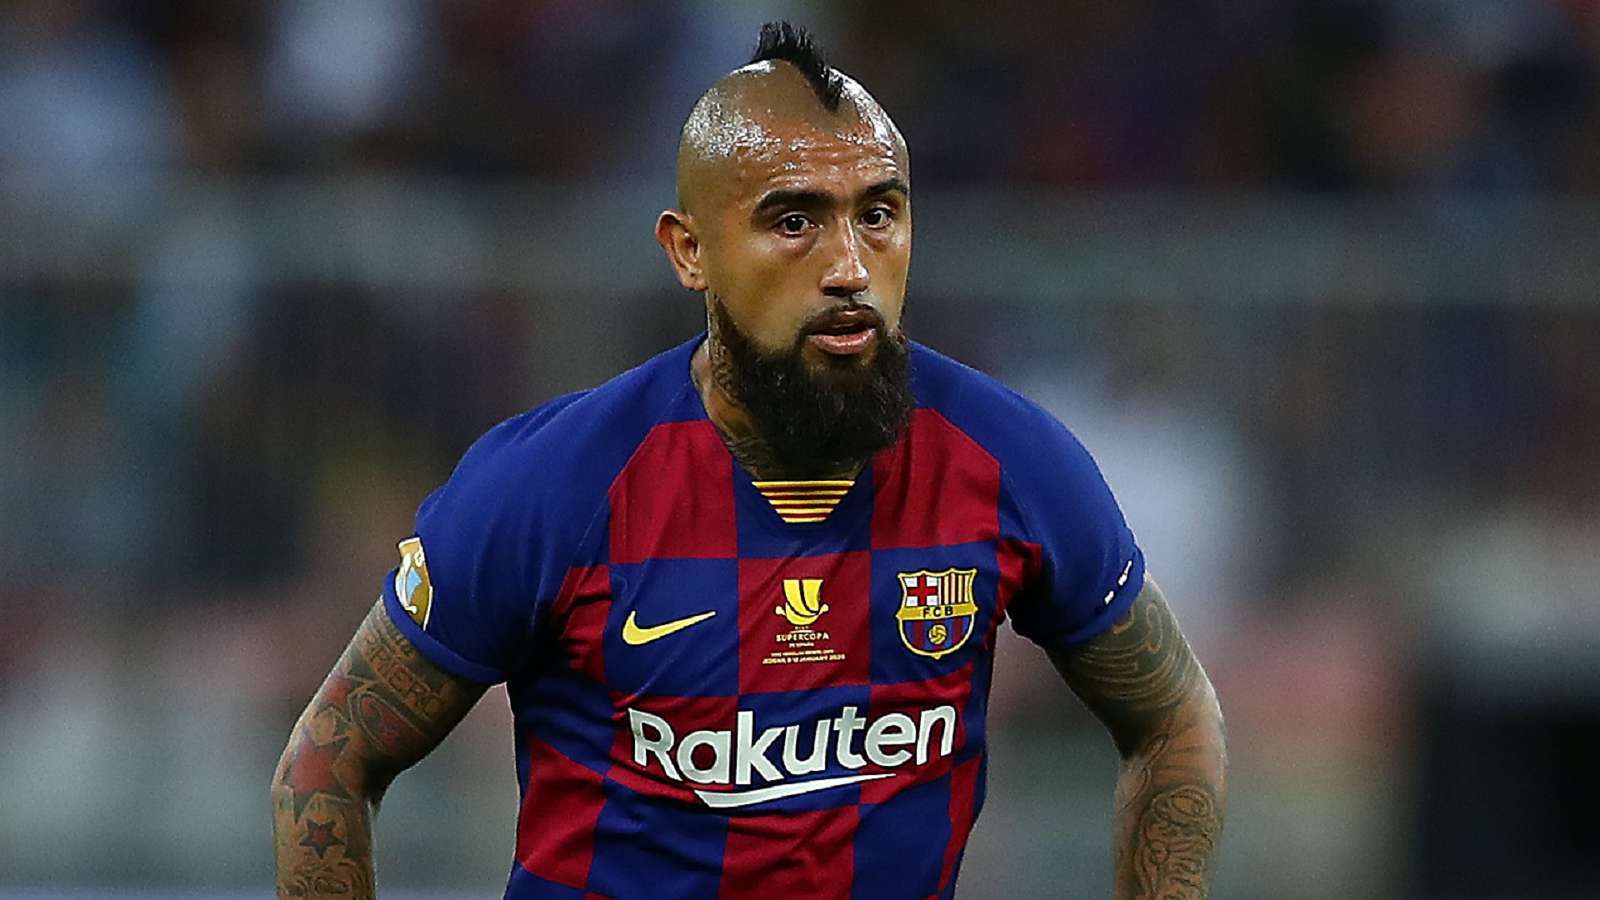 Vidal Receives Compliment for His Barcelona Career from Another Great Player